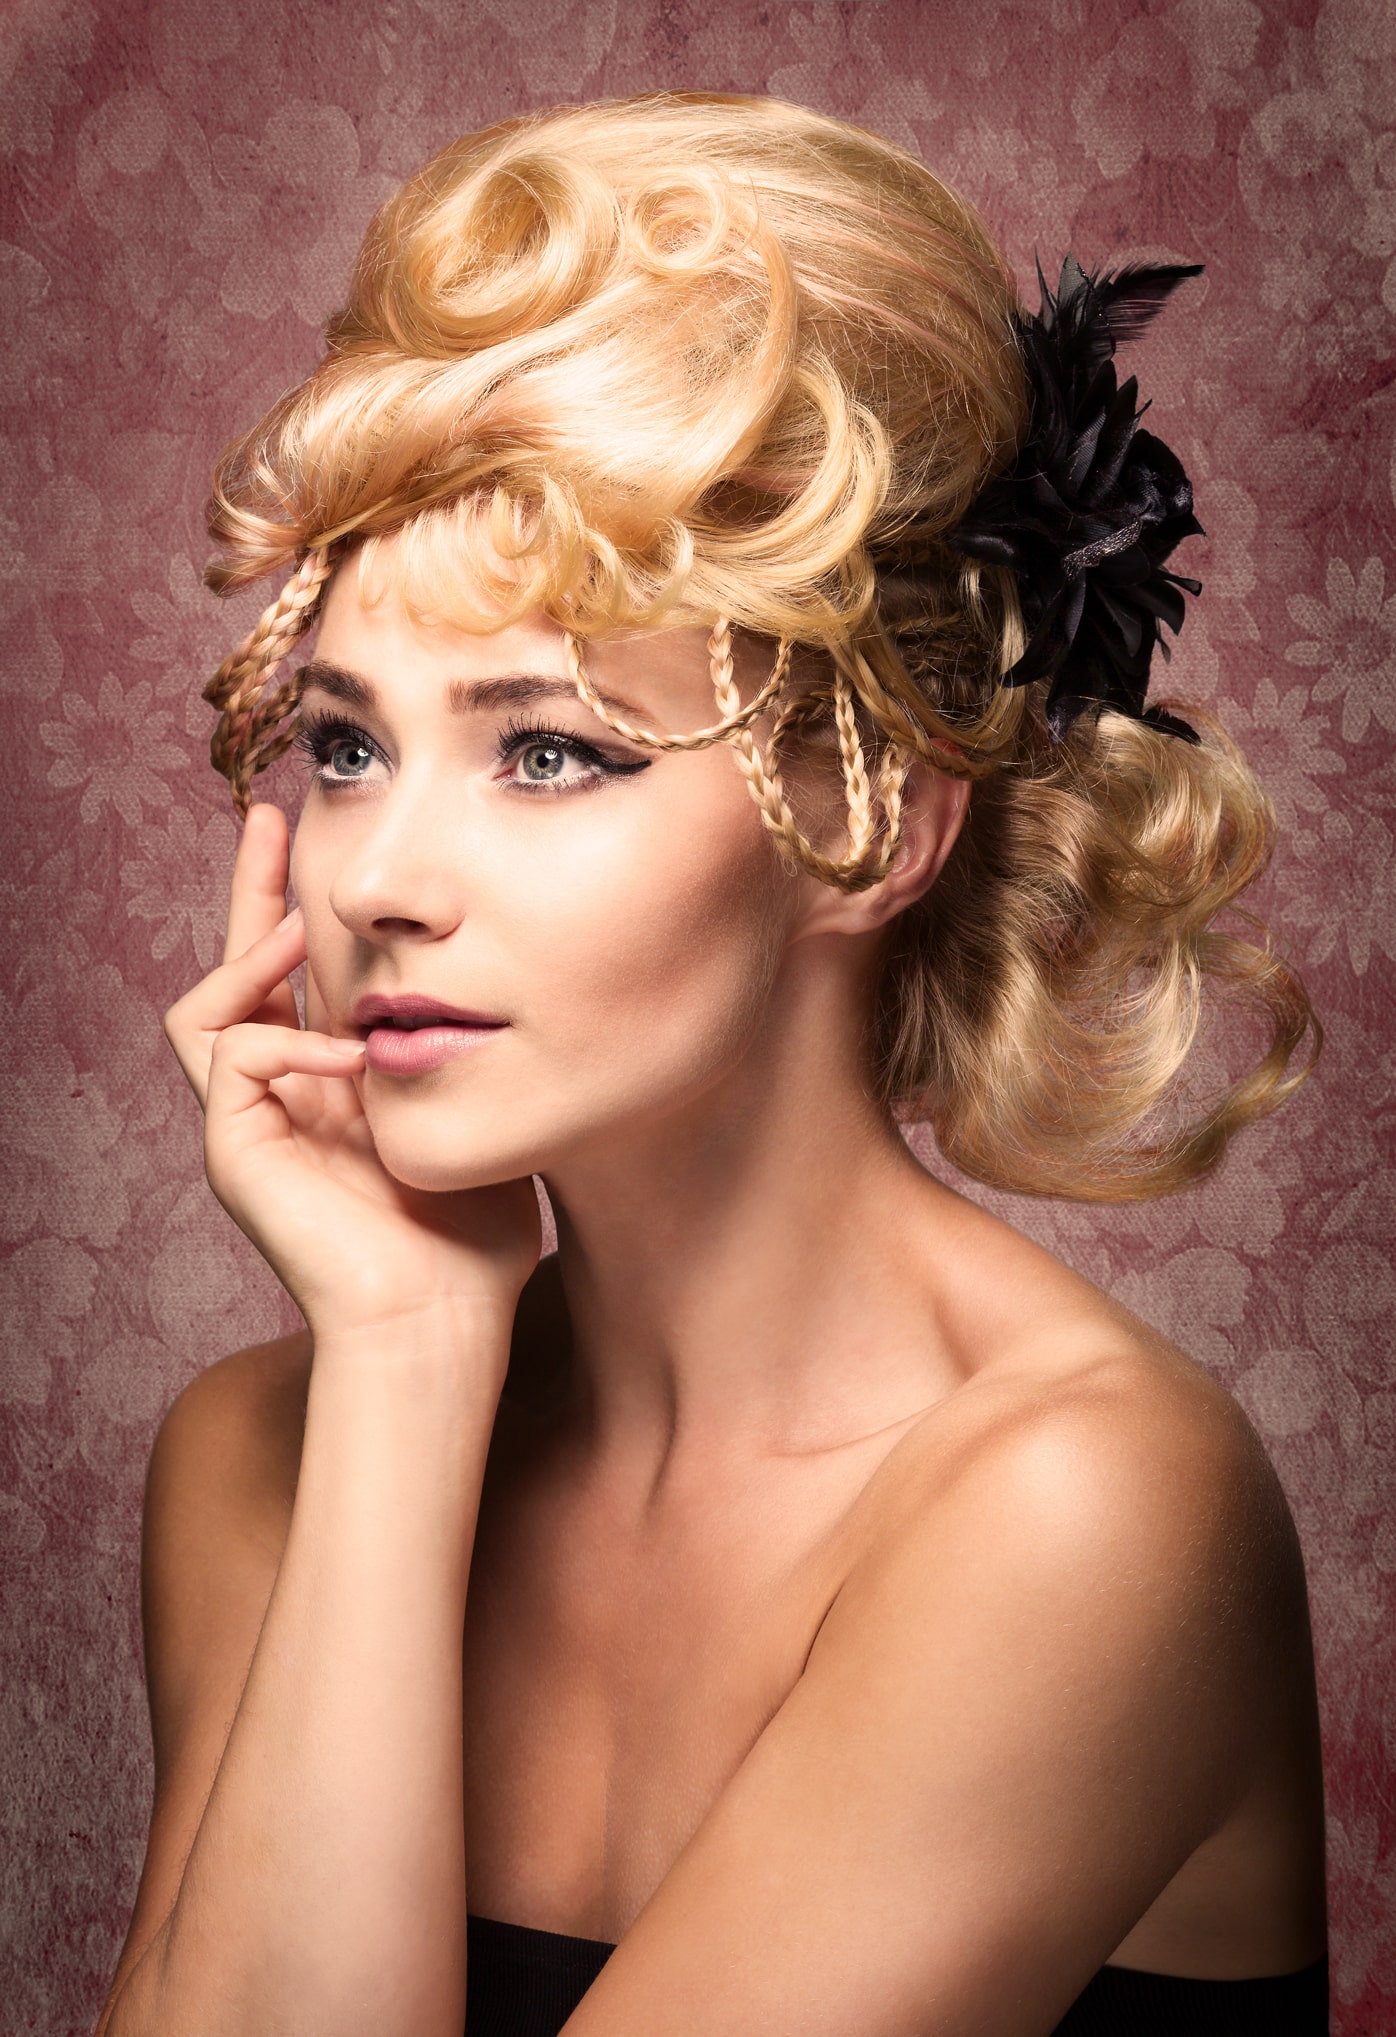 portrait of blonde woman with black headpiece